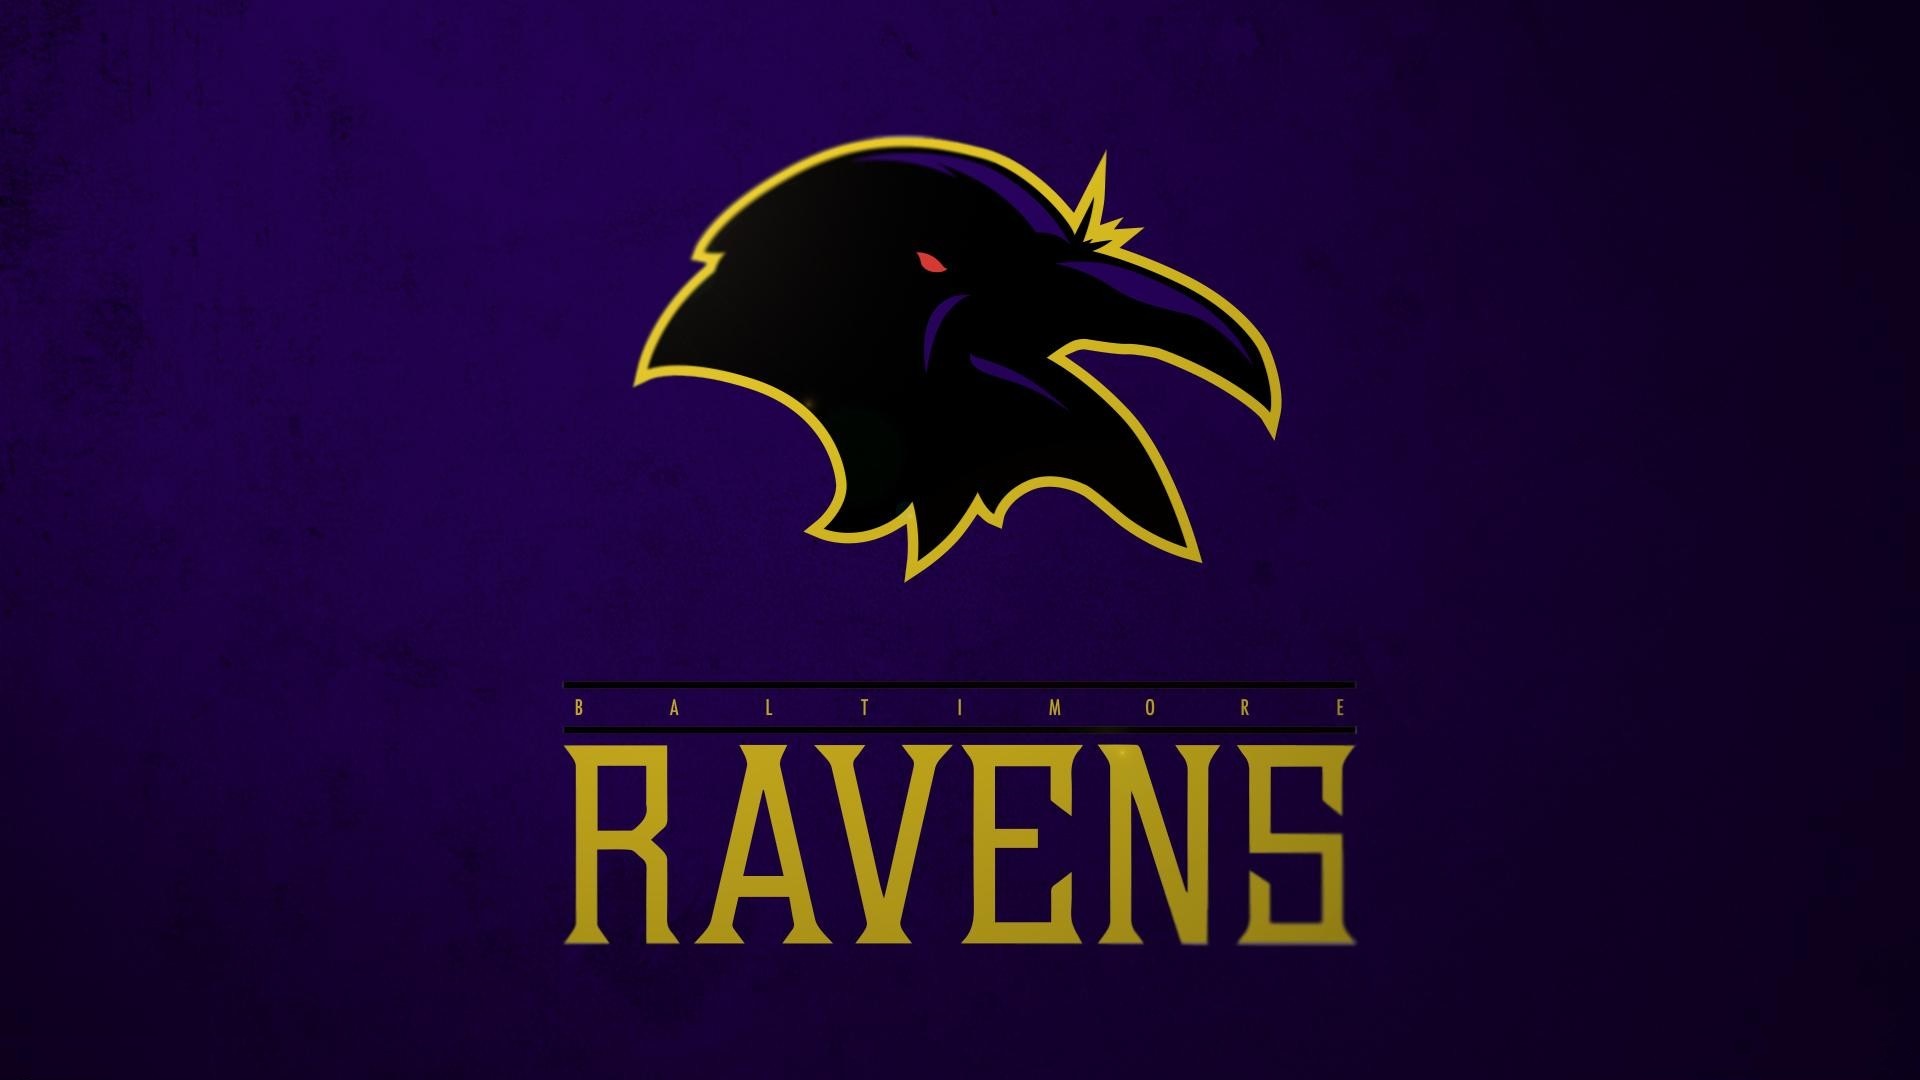 Ravens HD Wallpapers with high-resolution 1920x1080 pixel. You can use this wallpaper for your Mac or Windows Desktop Background, iPhone, Android or Tablet and another Smartphone device